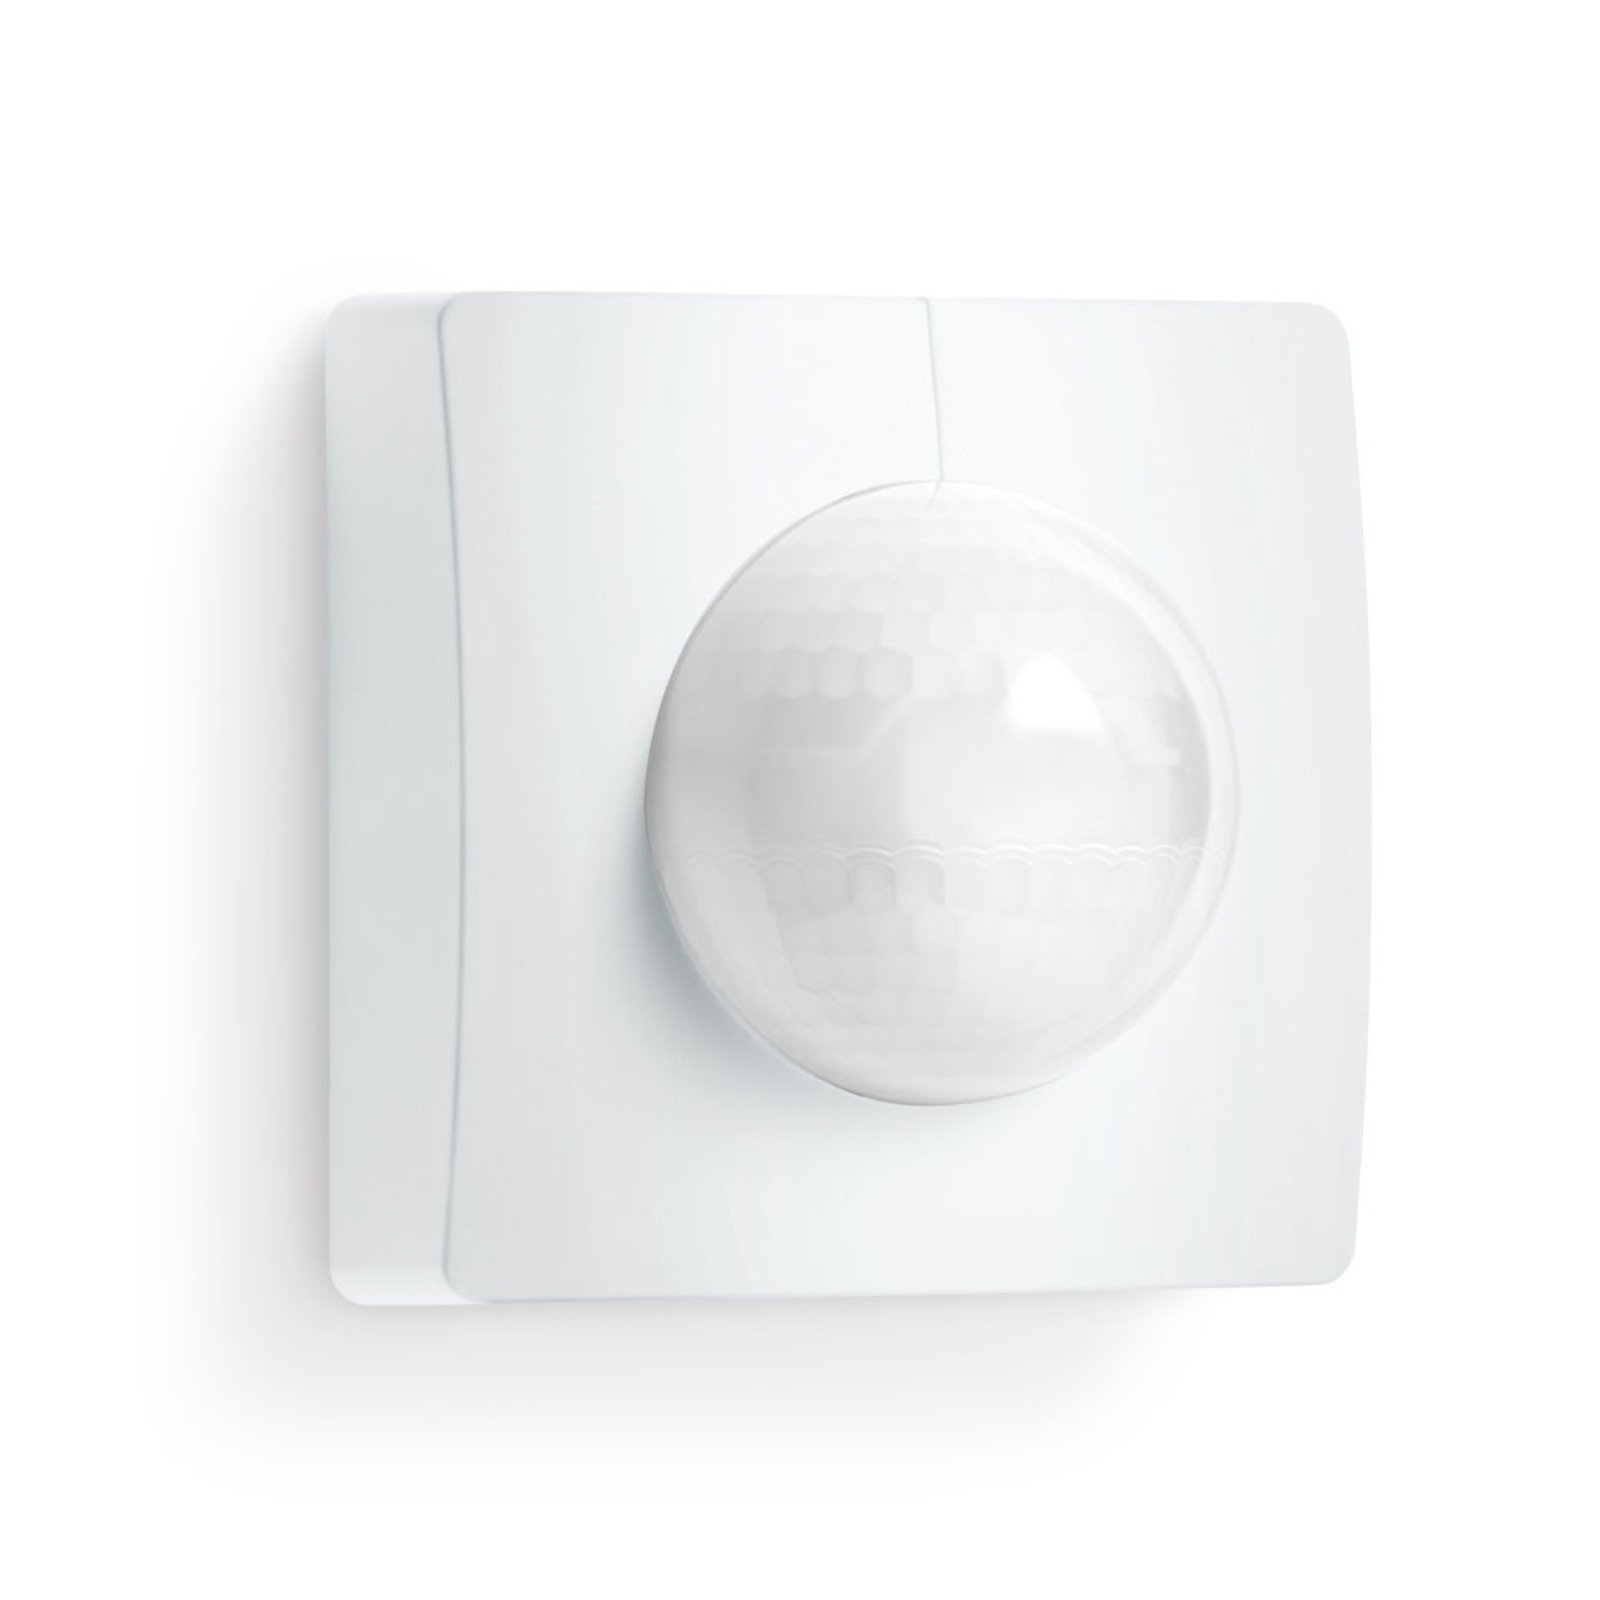 IS 3180 COM1 motion detector surface-mount angular